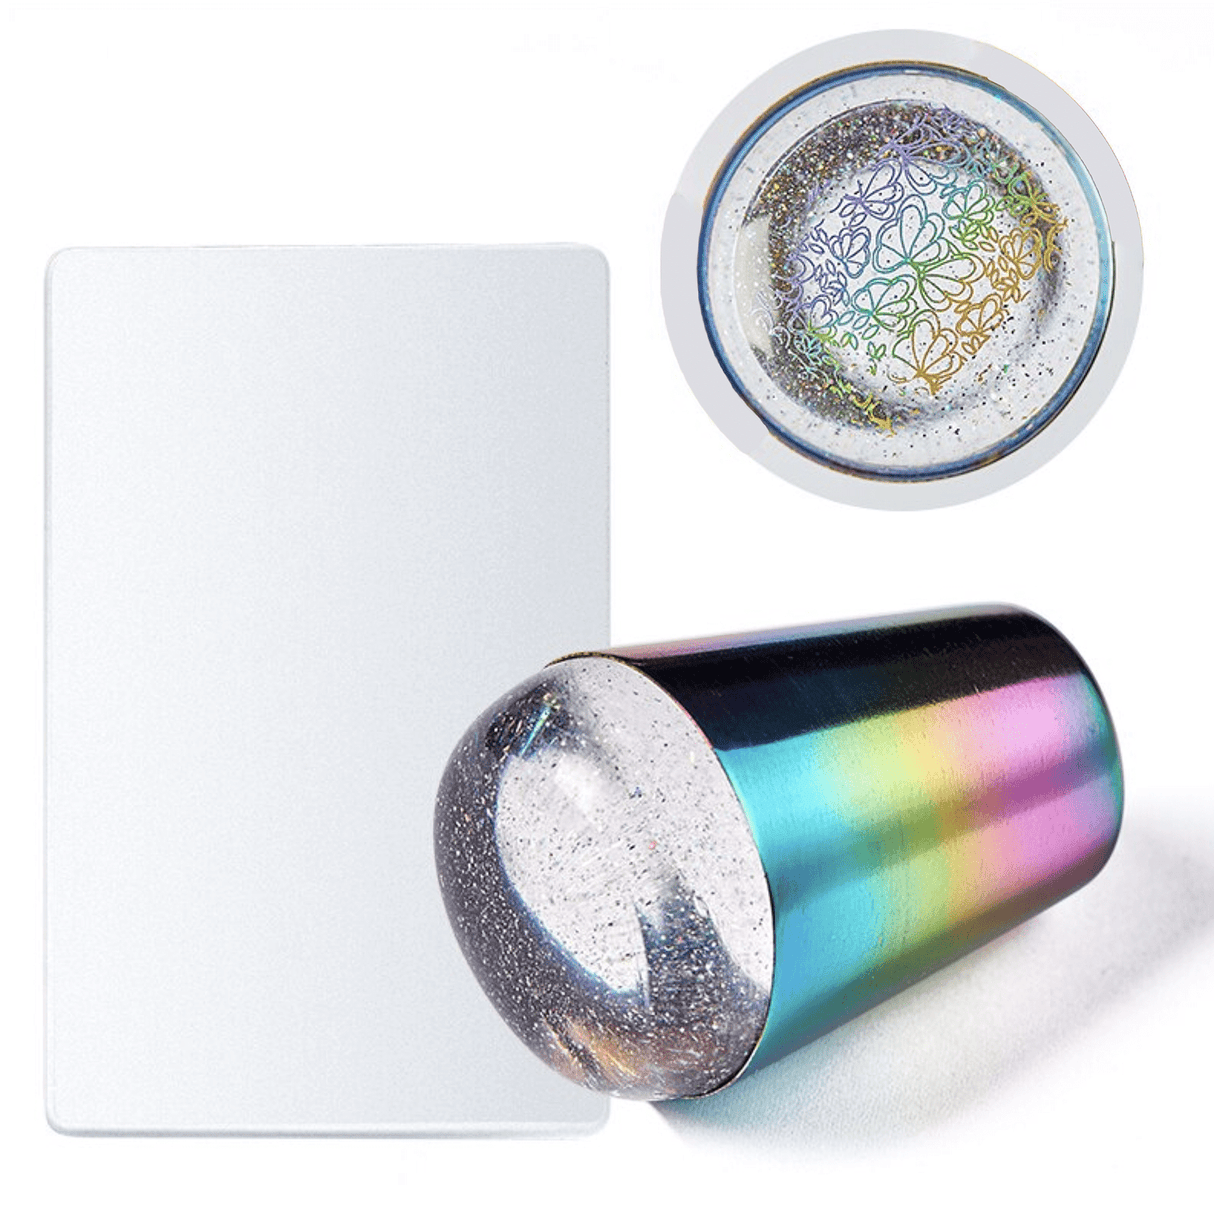 JNBS HOLOGRAPHIC Silicone Stamper (Stamping Plate & Scraper Set)